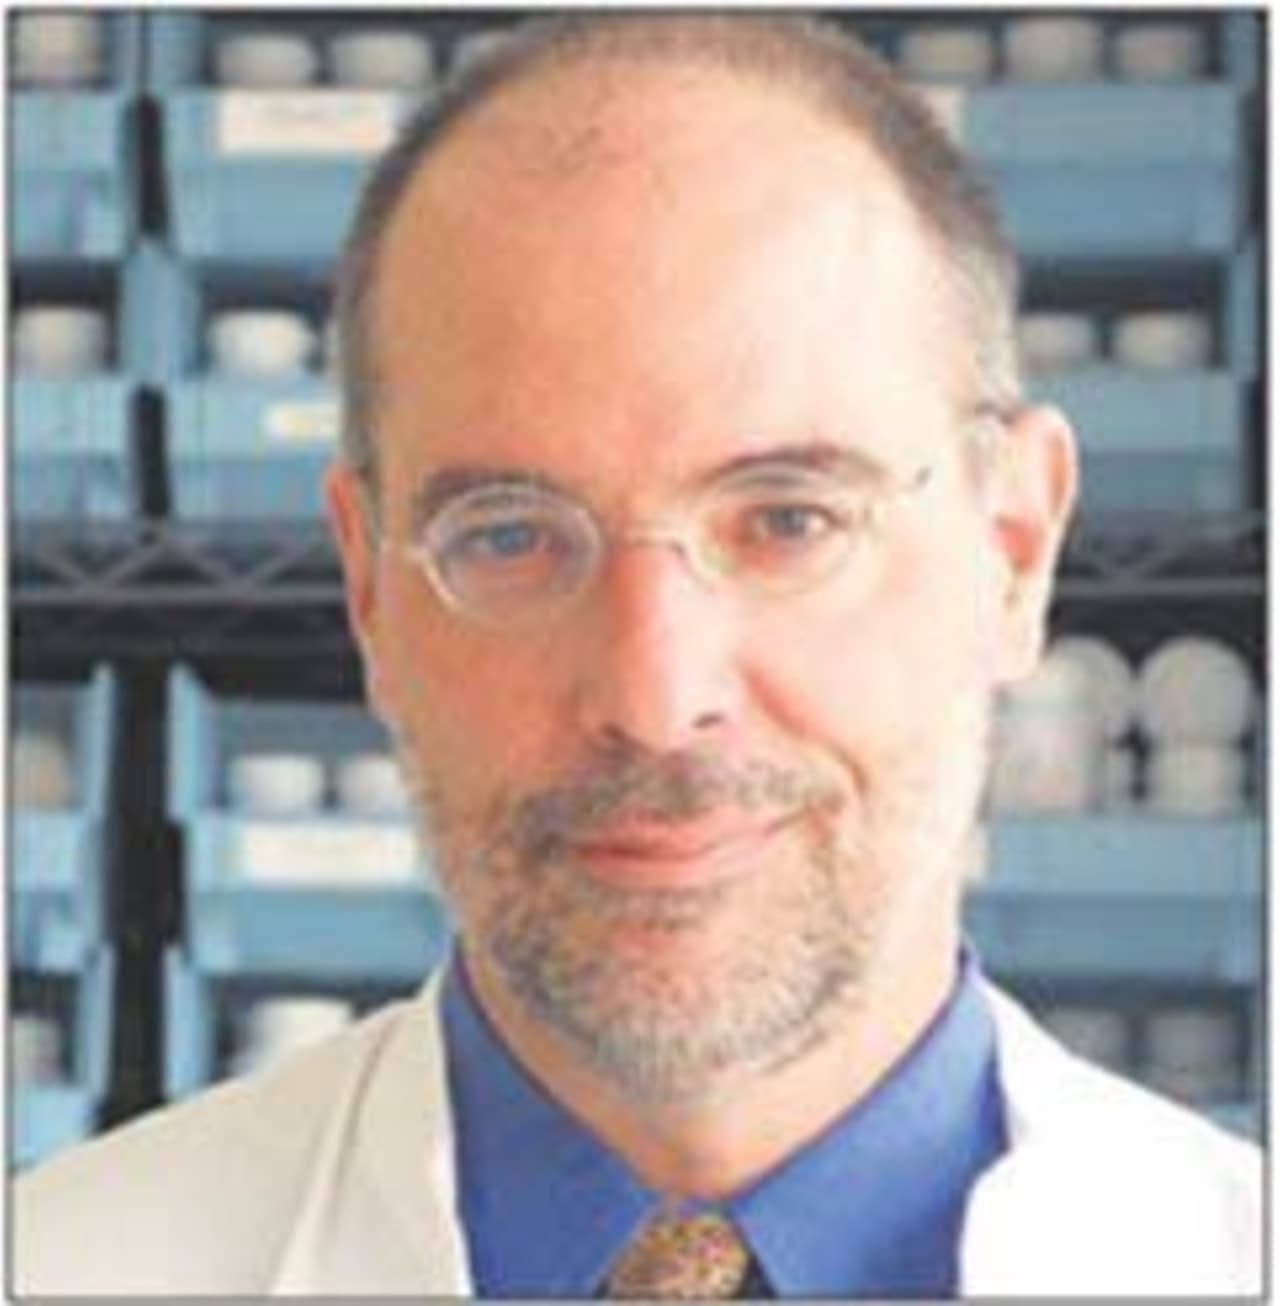 Dr. Peter D'Adamo will reveal the "10 Things You Never Knew About Your Blood Type" on Jan. 23 at the New Canaan Library.